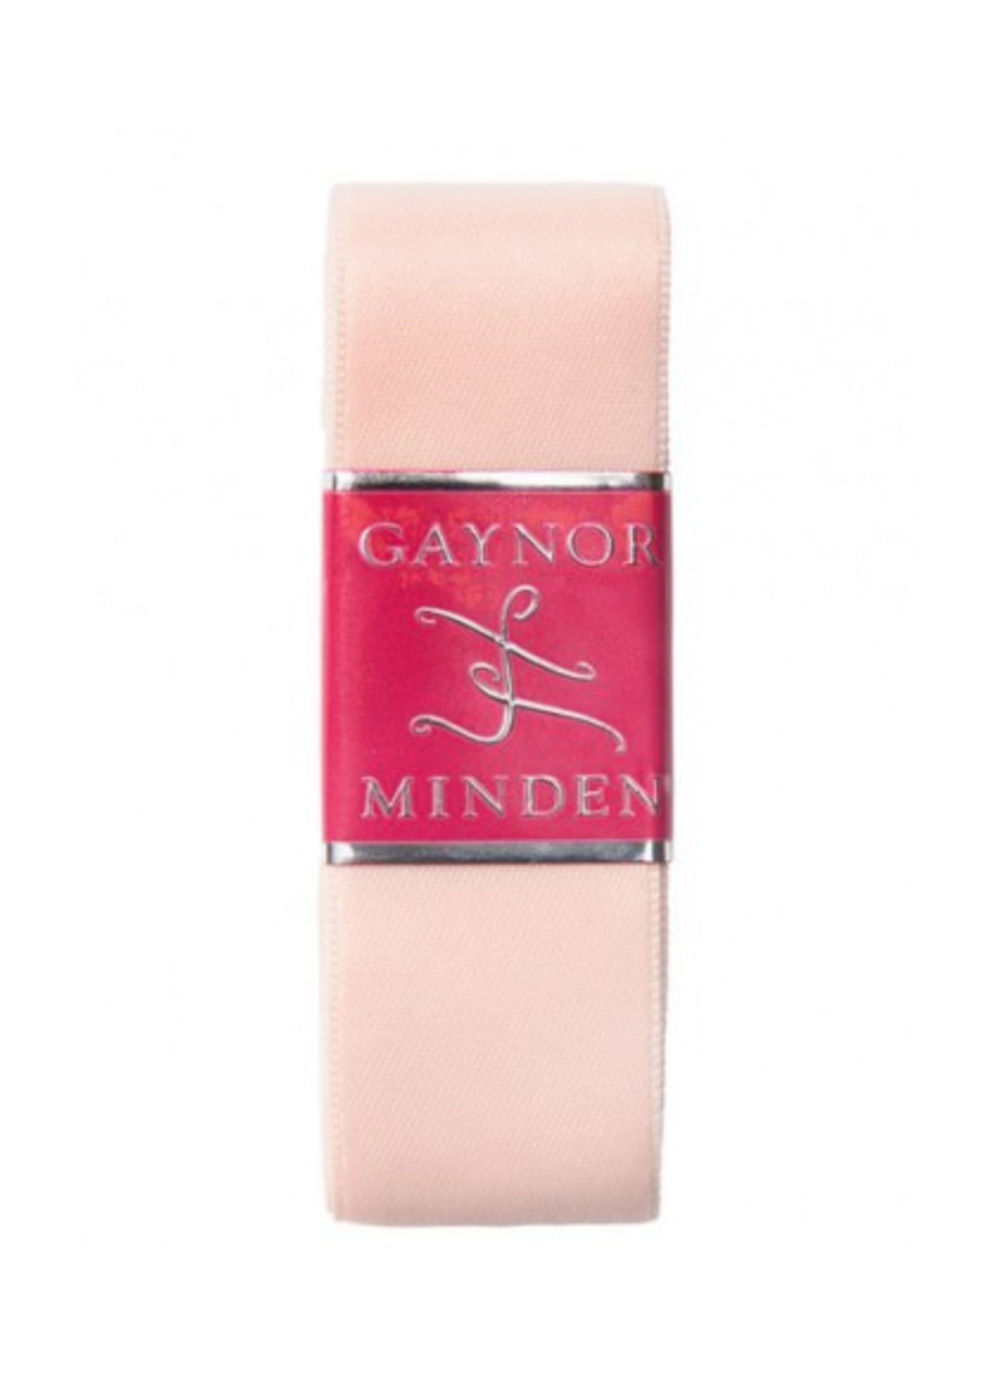 Ribbon for pointe shoes GAYNOR MINDEN